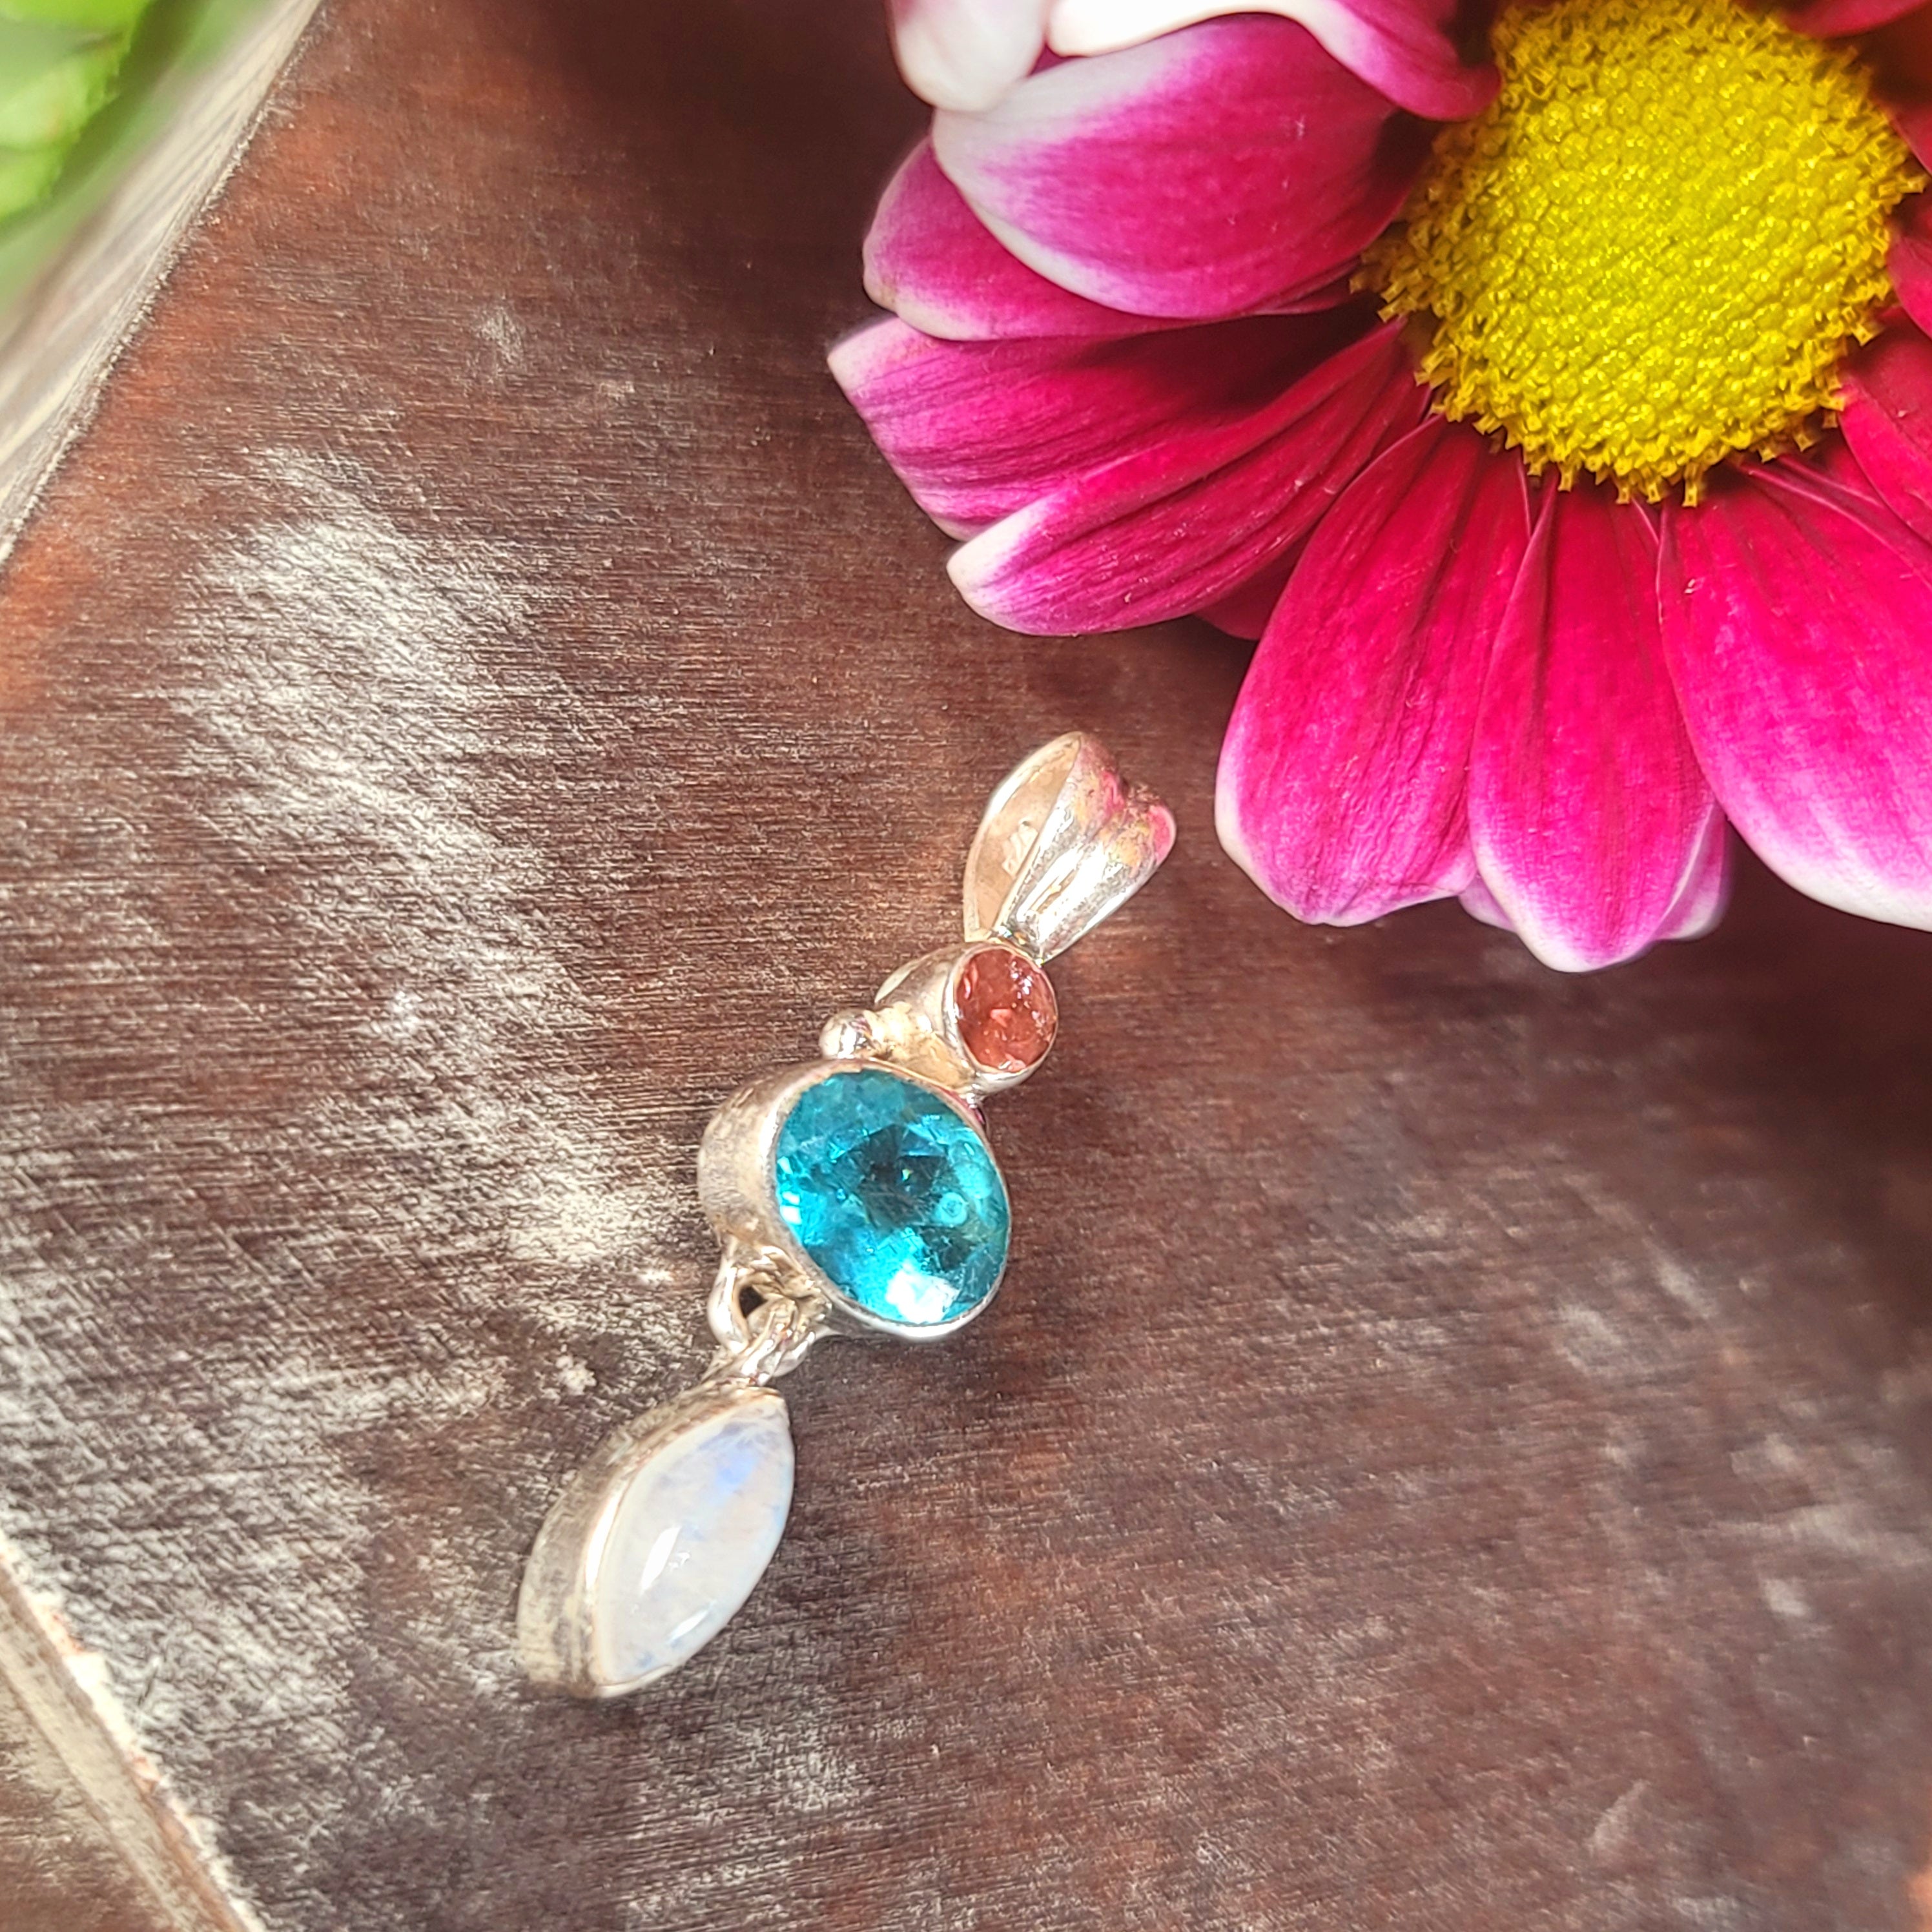 Rainbow Moonstone x Pink Tourmaline x Blue Apatite Pendant .925 Silver for New Beginnings and Goddess Energy